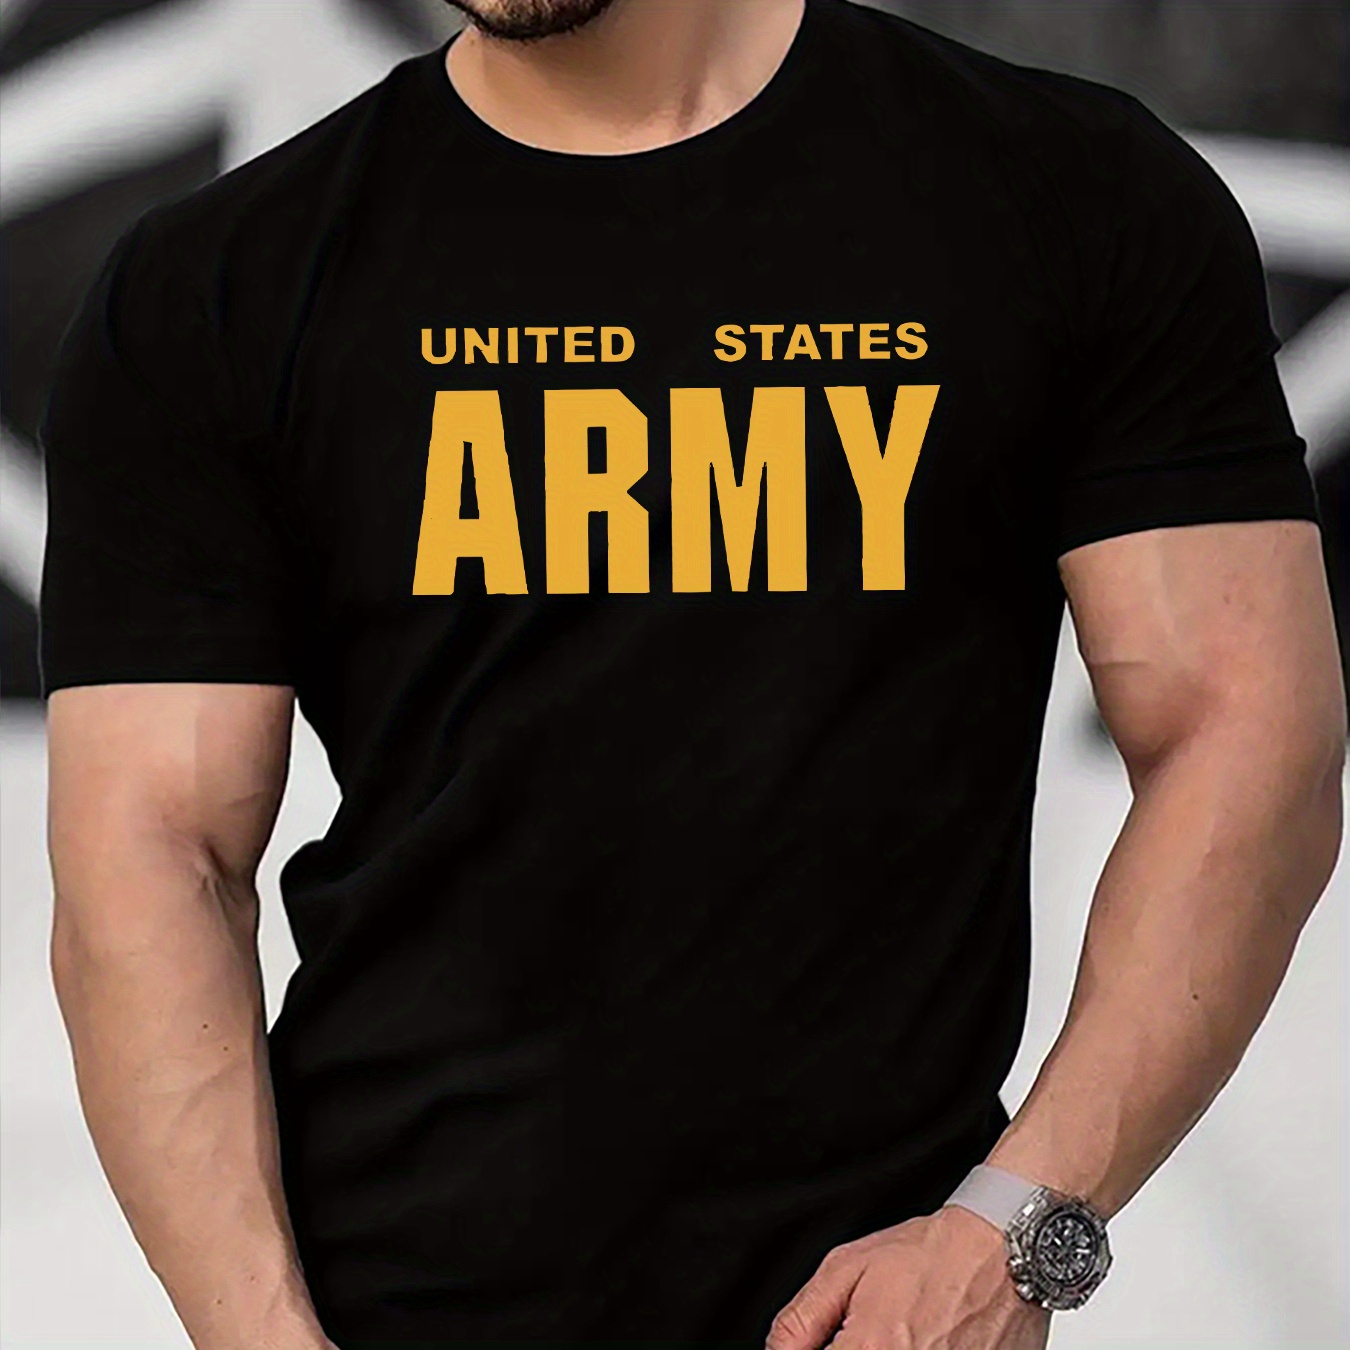 

1 Pc, 100% Cotton T-shirt, United States Army Print T Shirt, Tees For Men, Casual Short Sleeve T-shirt For Summer